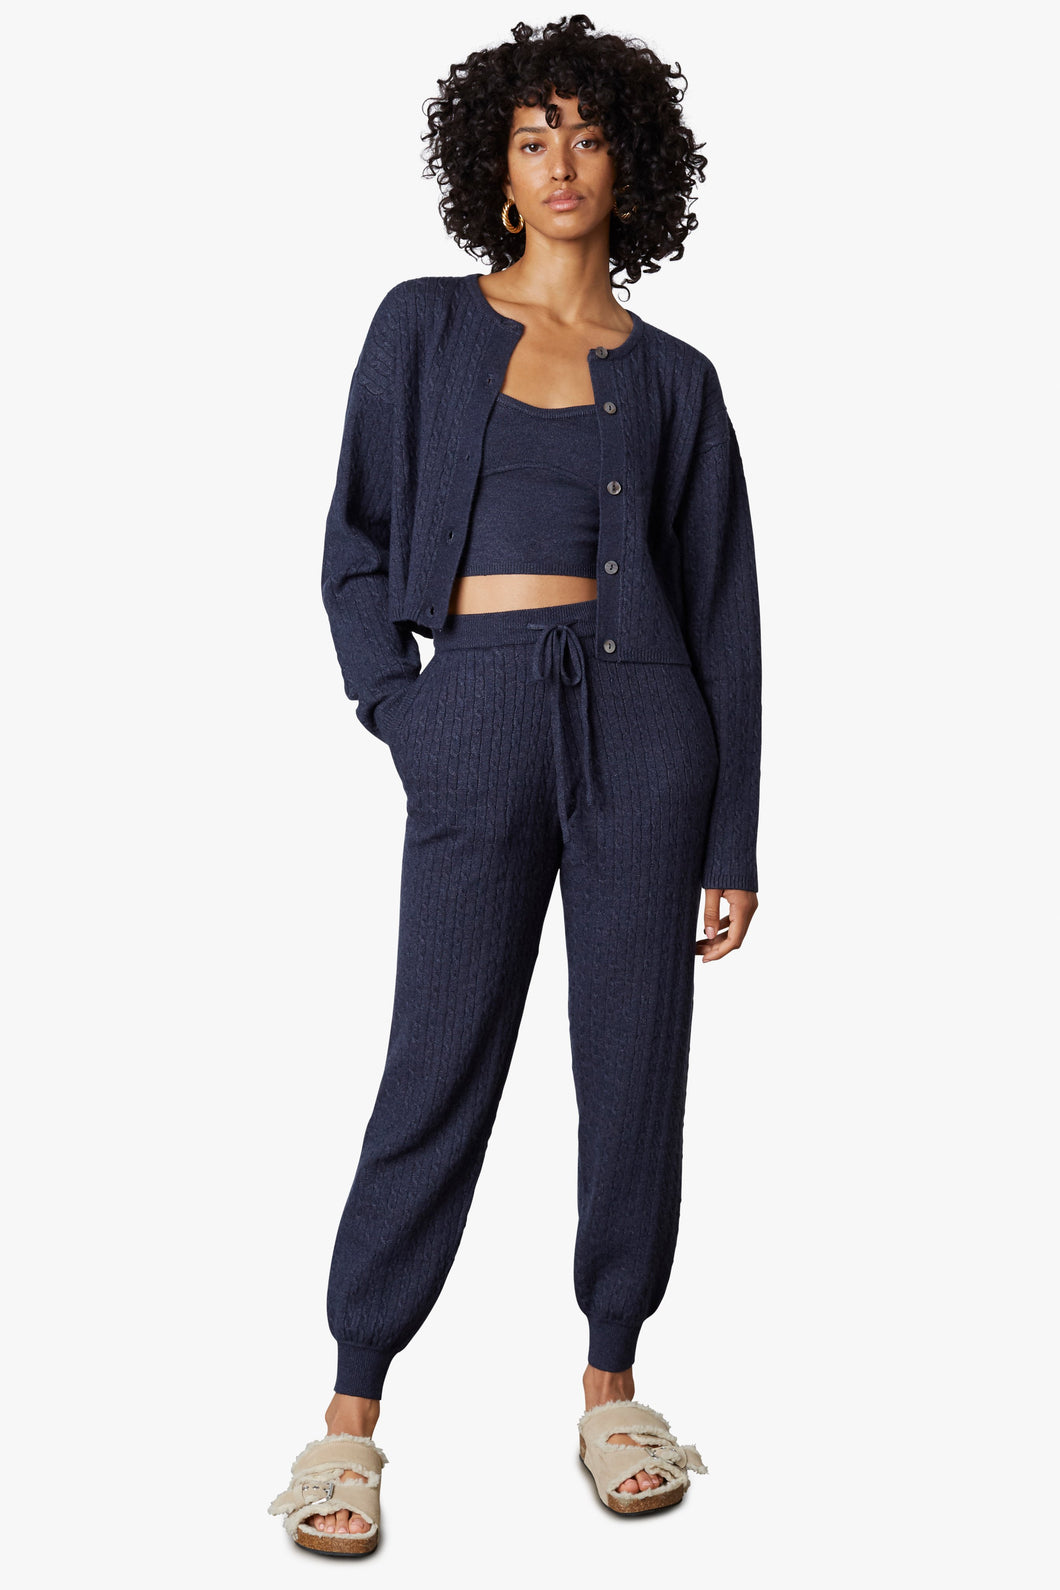 NIA Cable Knit Jogger – THD Shoppe